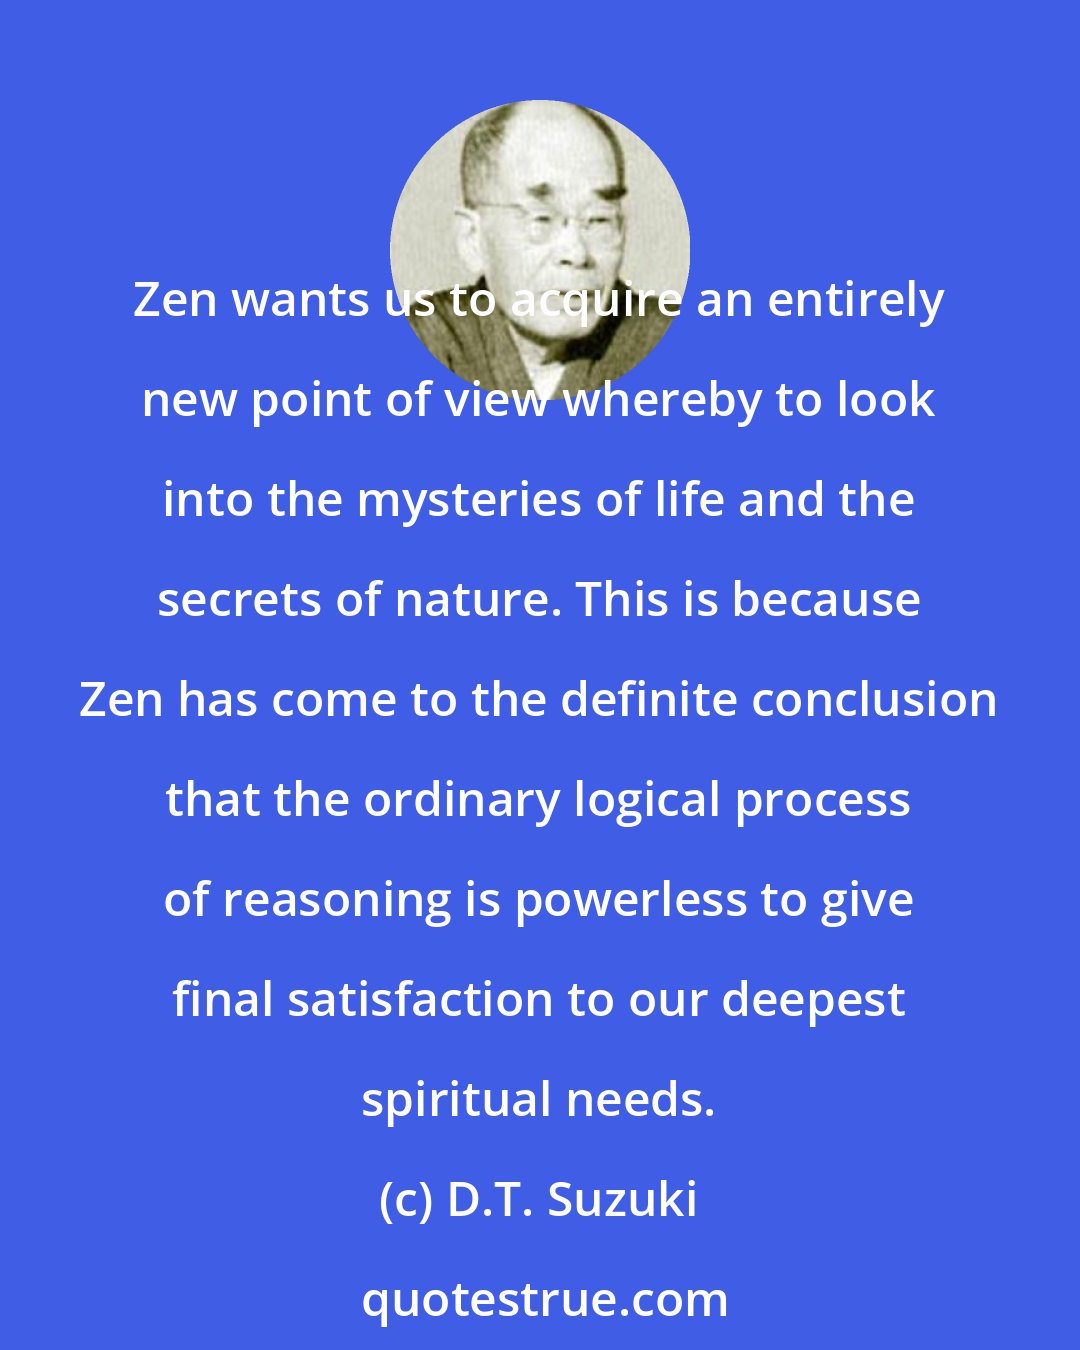 D.T. Suzuki: Zen wants us to acquire an entirely new point of view whereby to look into the mysteries of life and the secrets of nature. This is because Zen has come to the definite conclusion that the ordinary logical process of reasoning is powerless to give final satisfaction to our deepest spiritual needs.